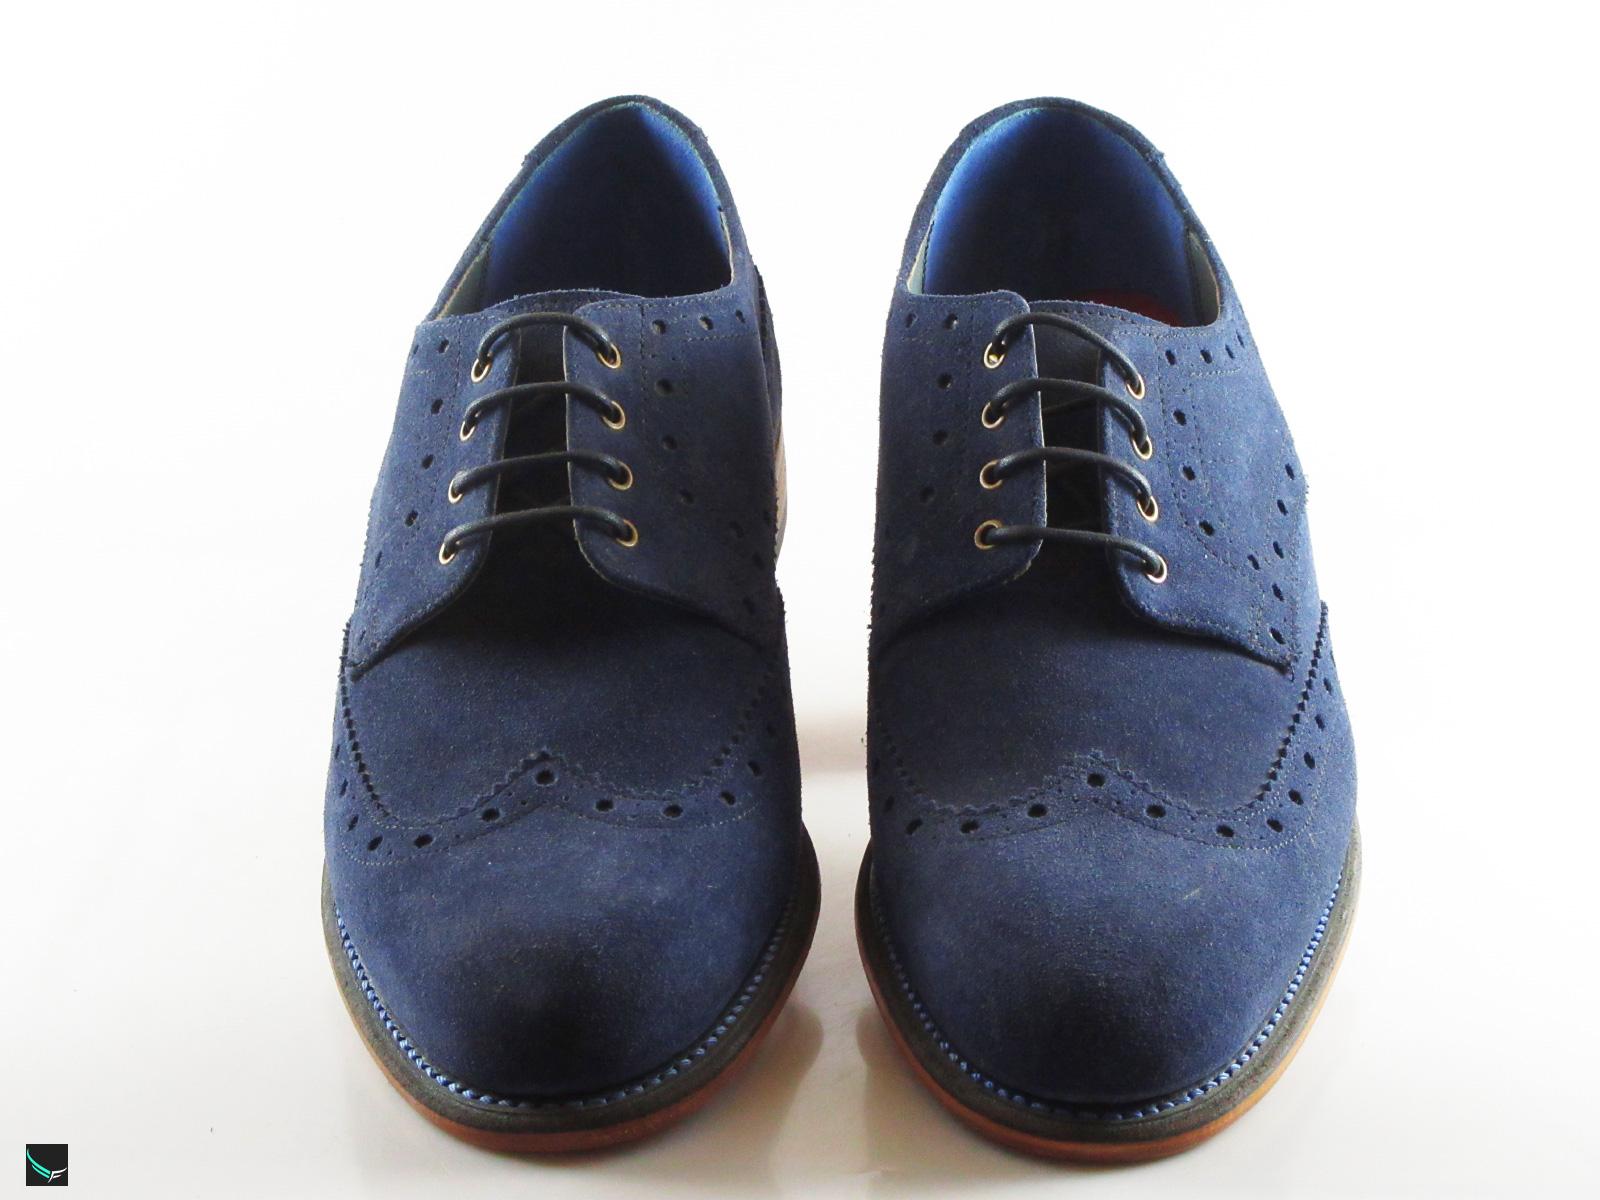 Men's Leather Blue Shoes - 3445 - Leather Collections On Frostfreak.com